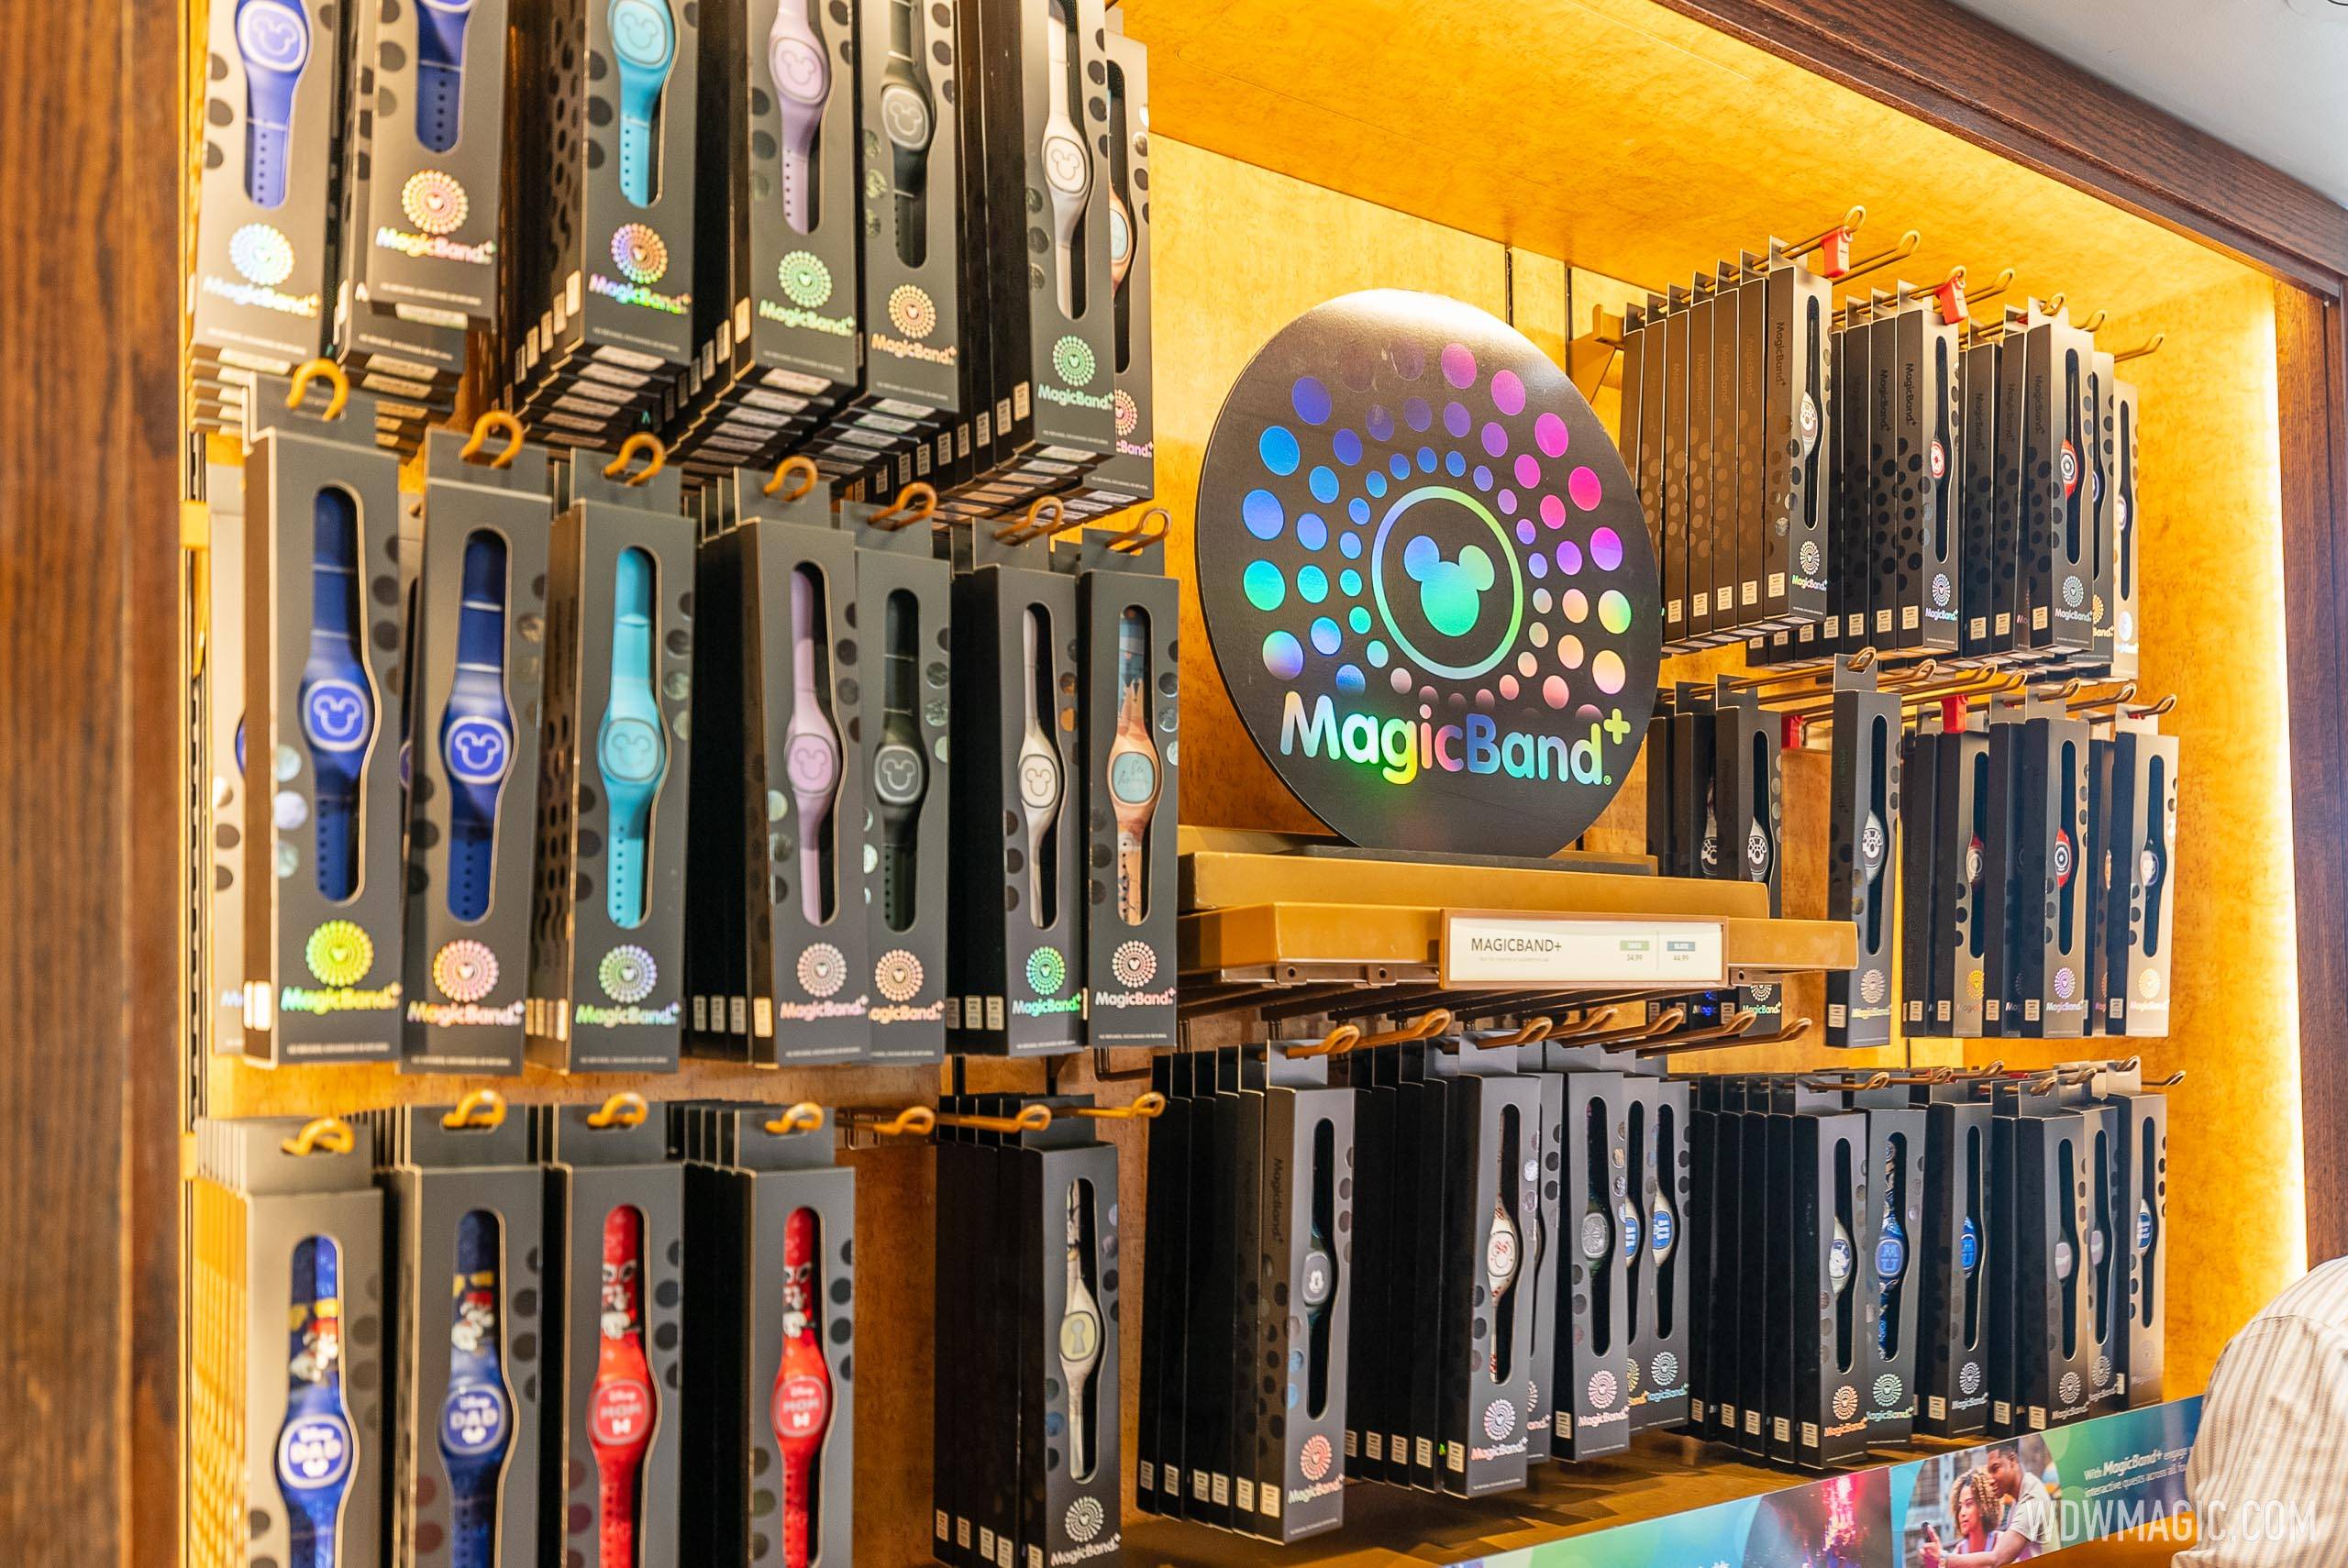 Hands on with MagicBand+